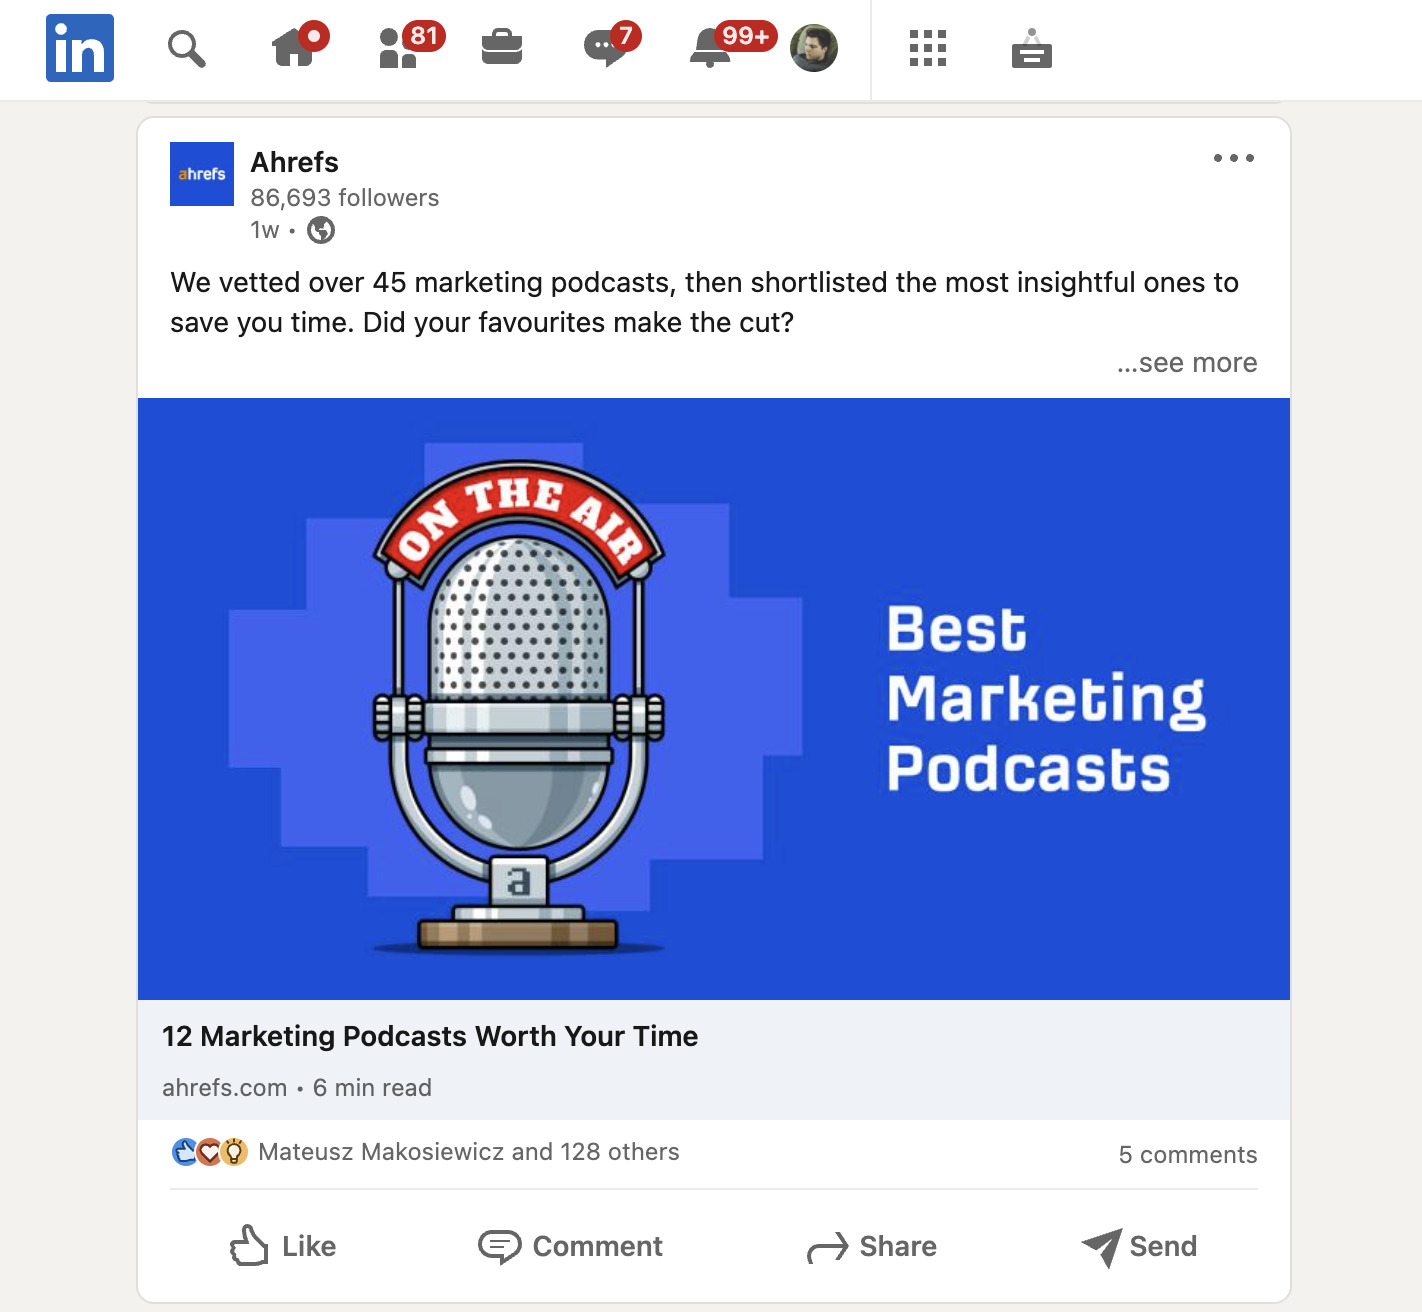 "Best marketing podcasts" article shared on LinkedIn 